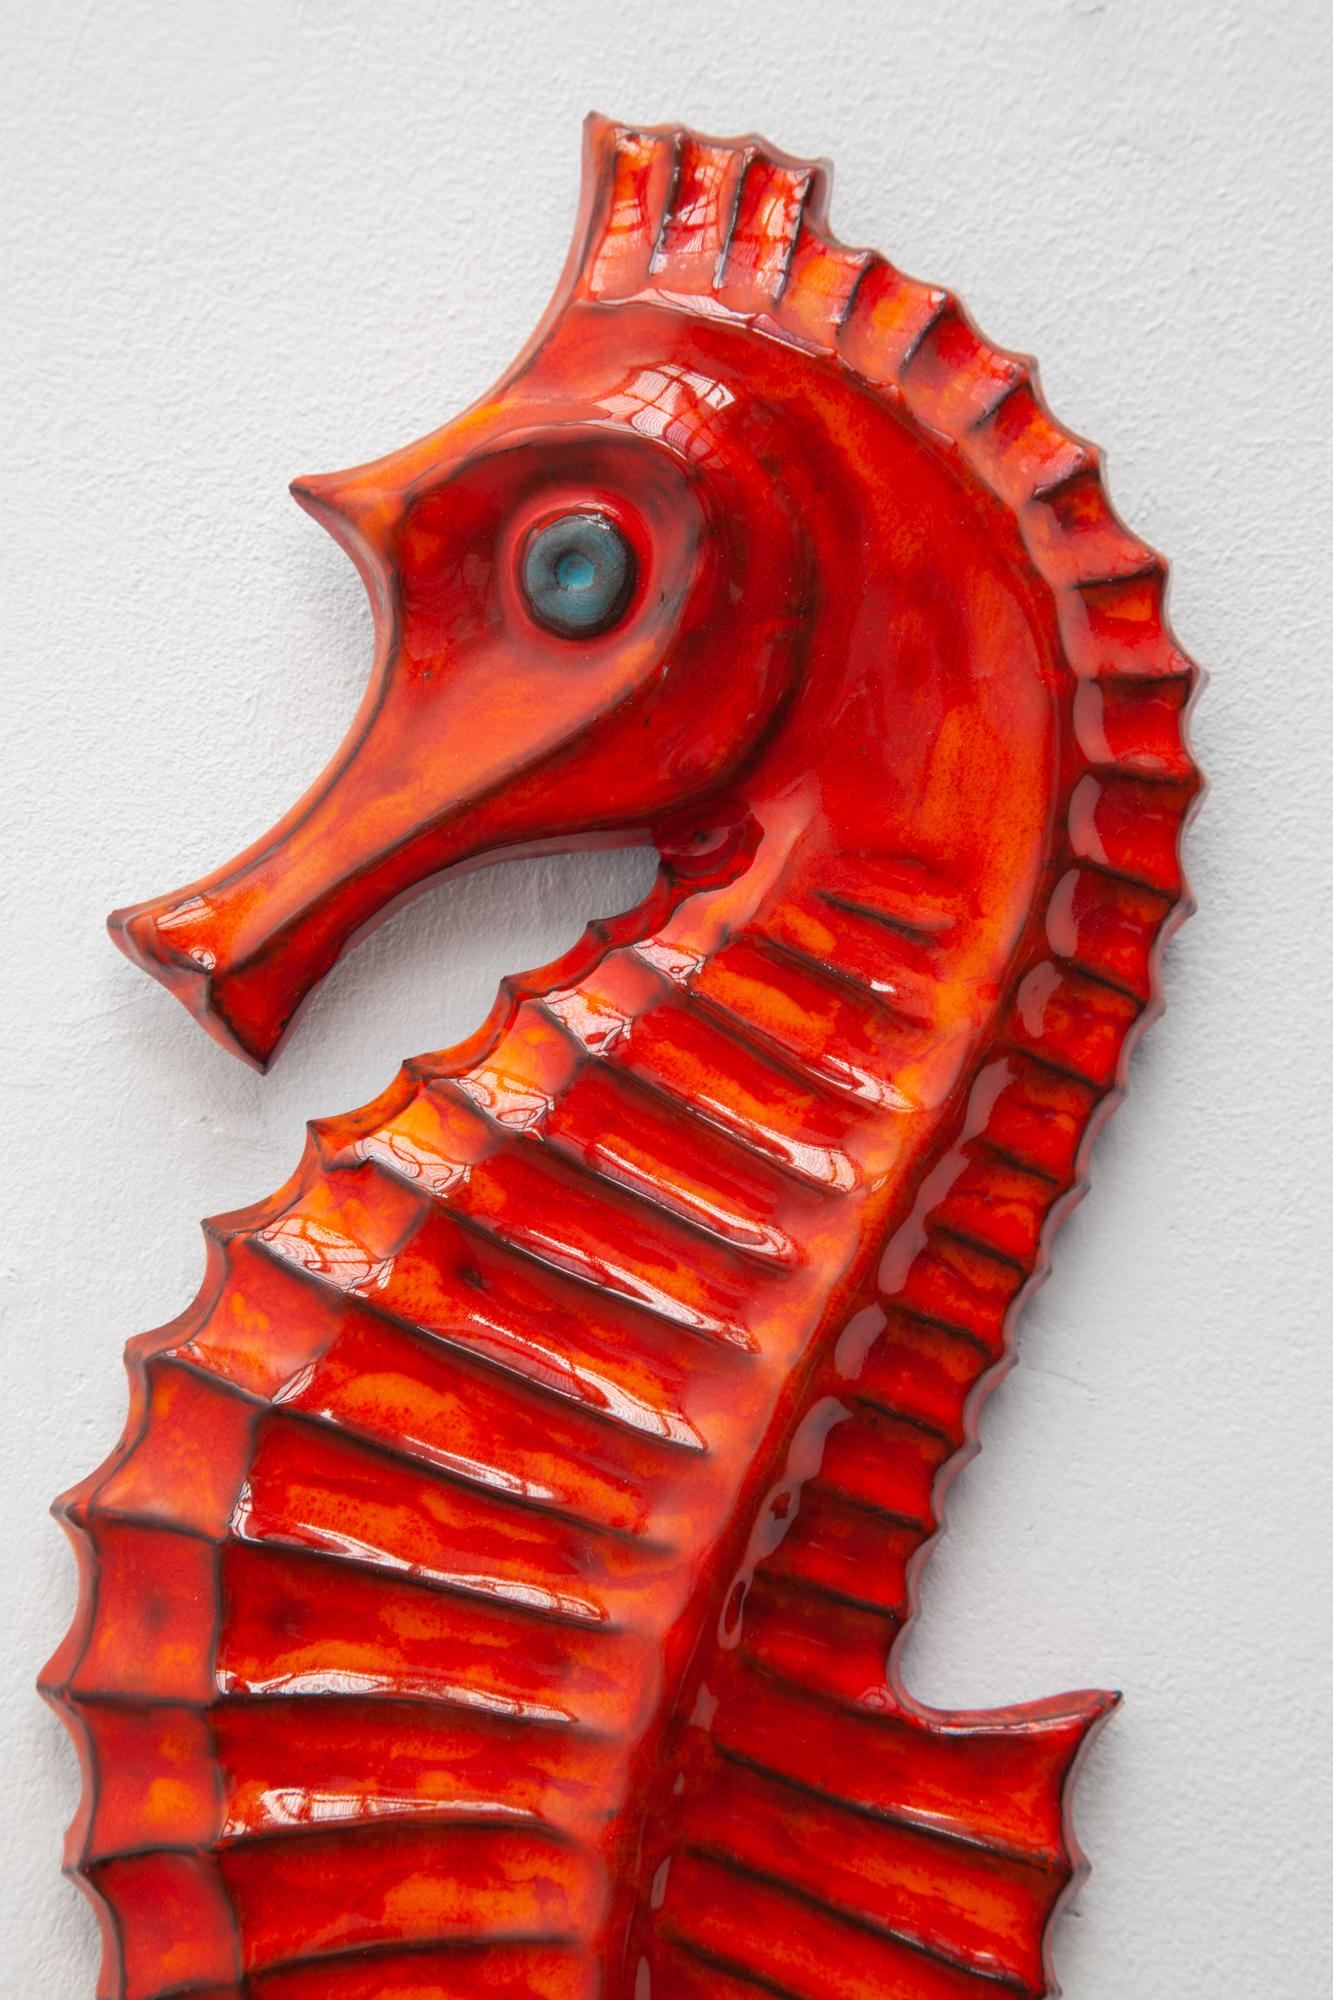 Glazed Seahorses Ceramic Wall Plaques Designed by F. Sanchez and Bayer, Belgium, 1960s